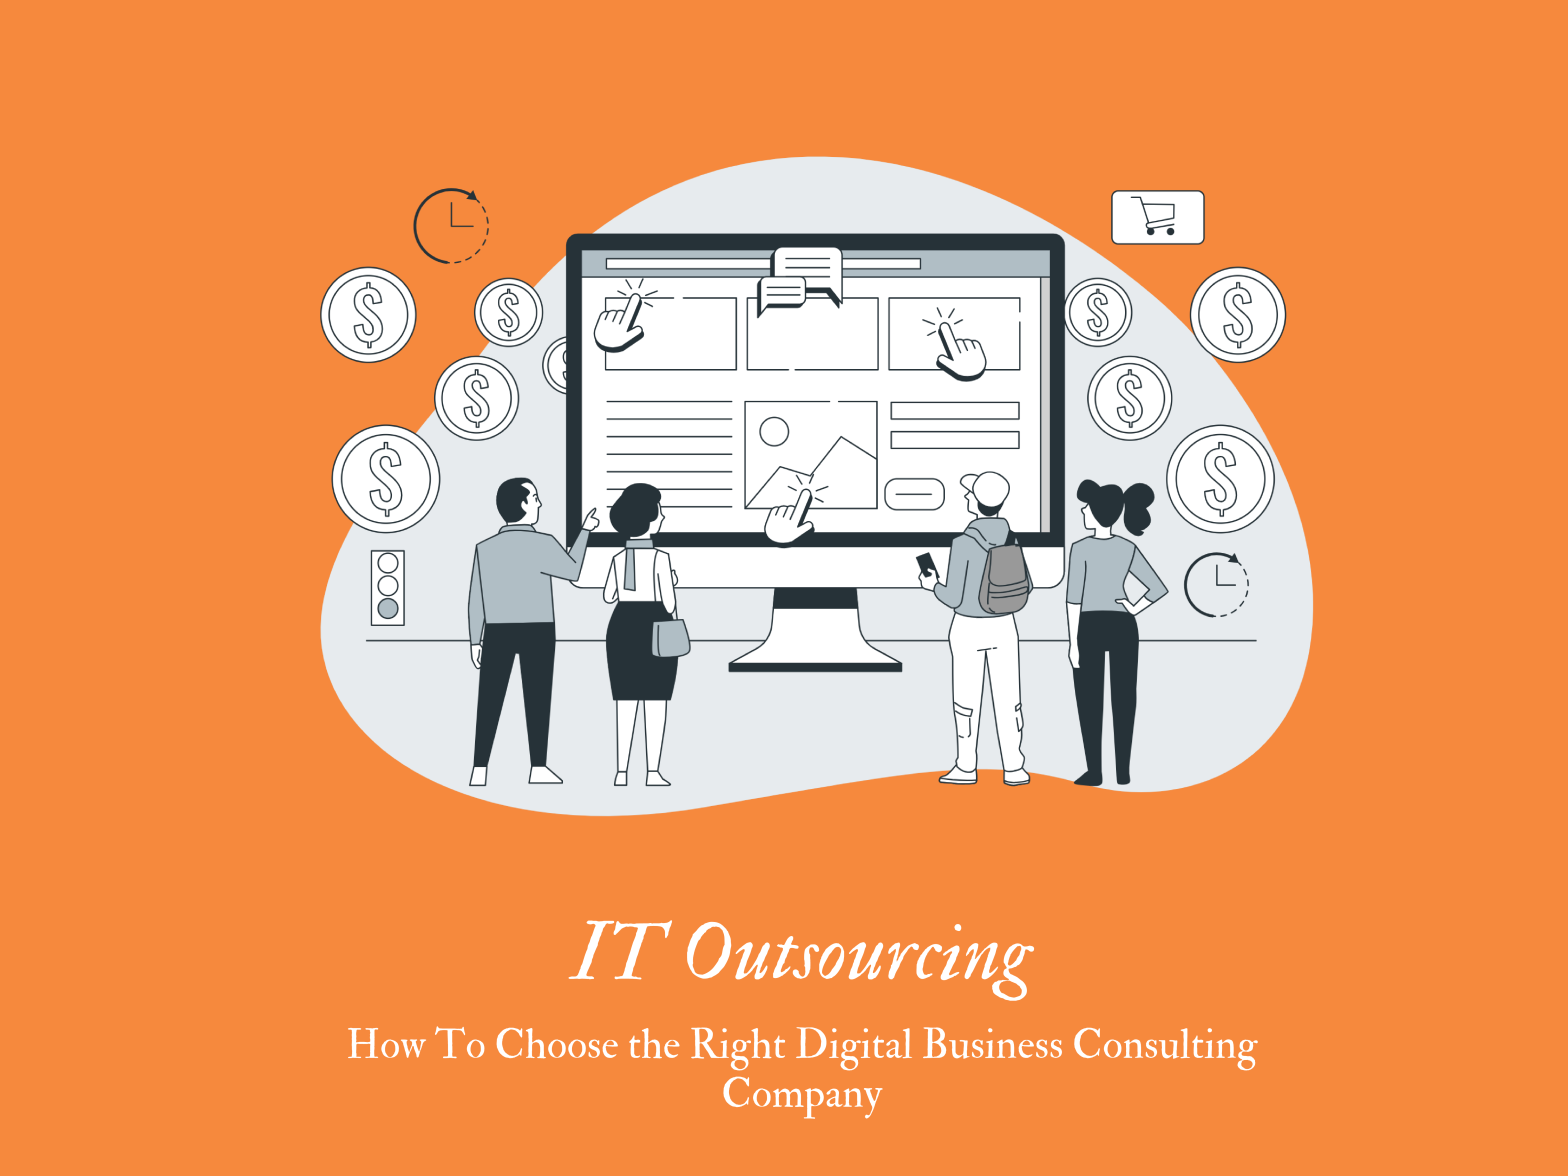 IT Outsourcing: How To Choose the Right Digital Business Consulting Company